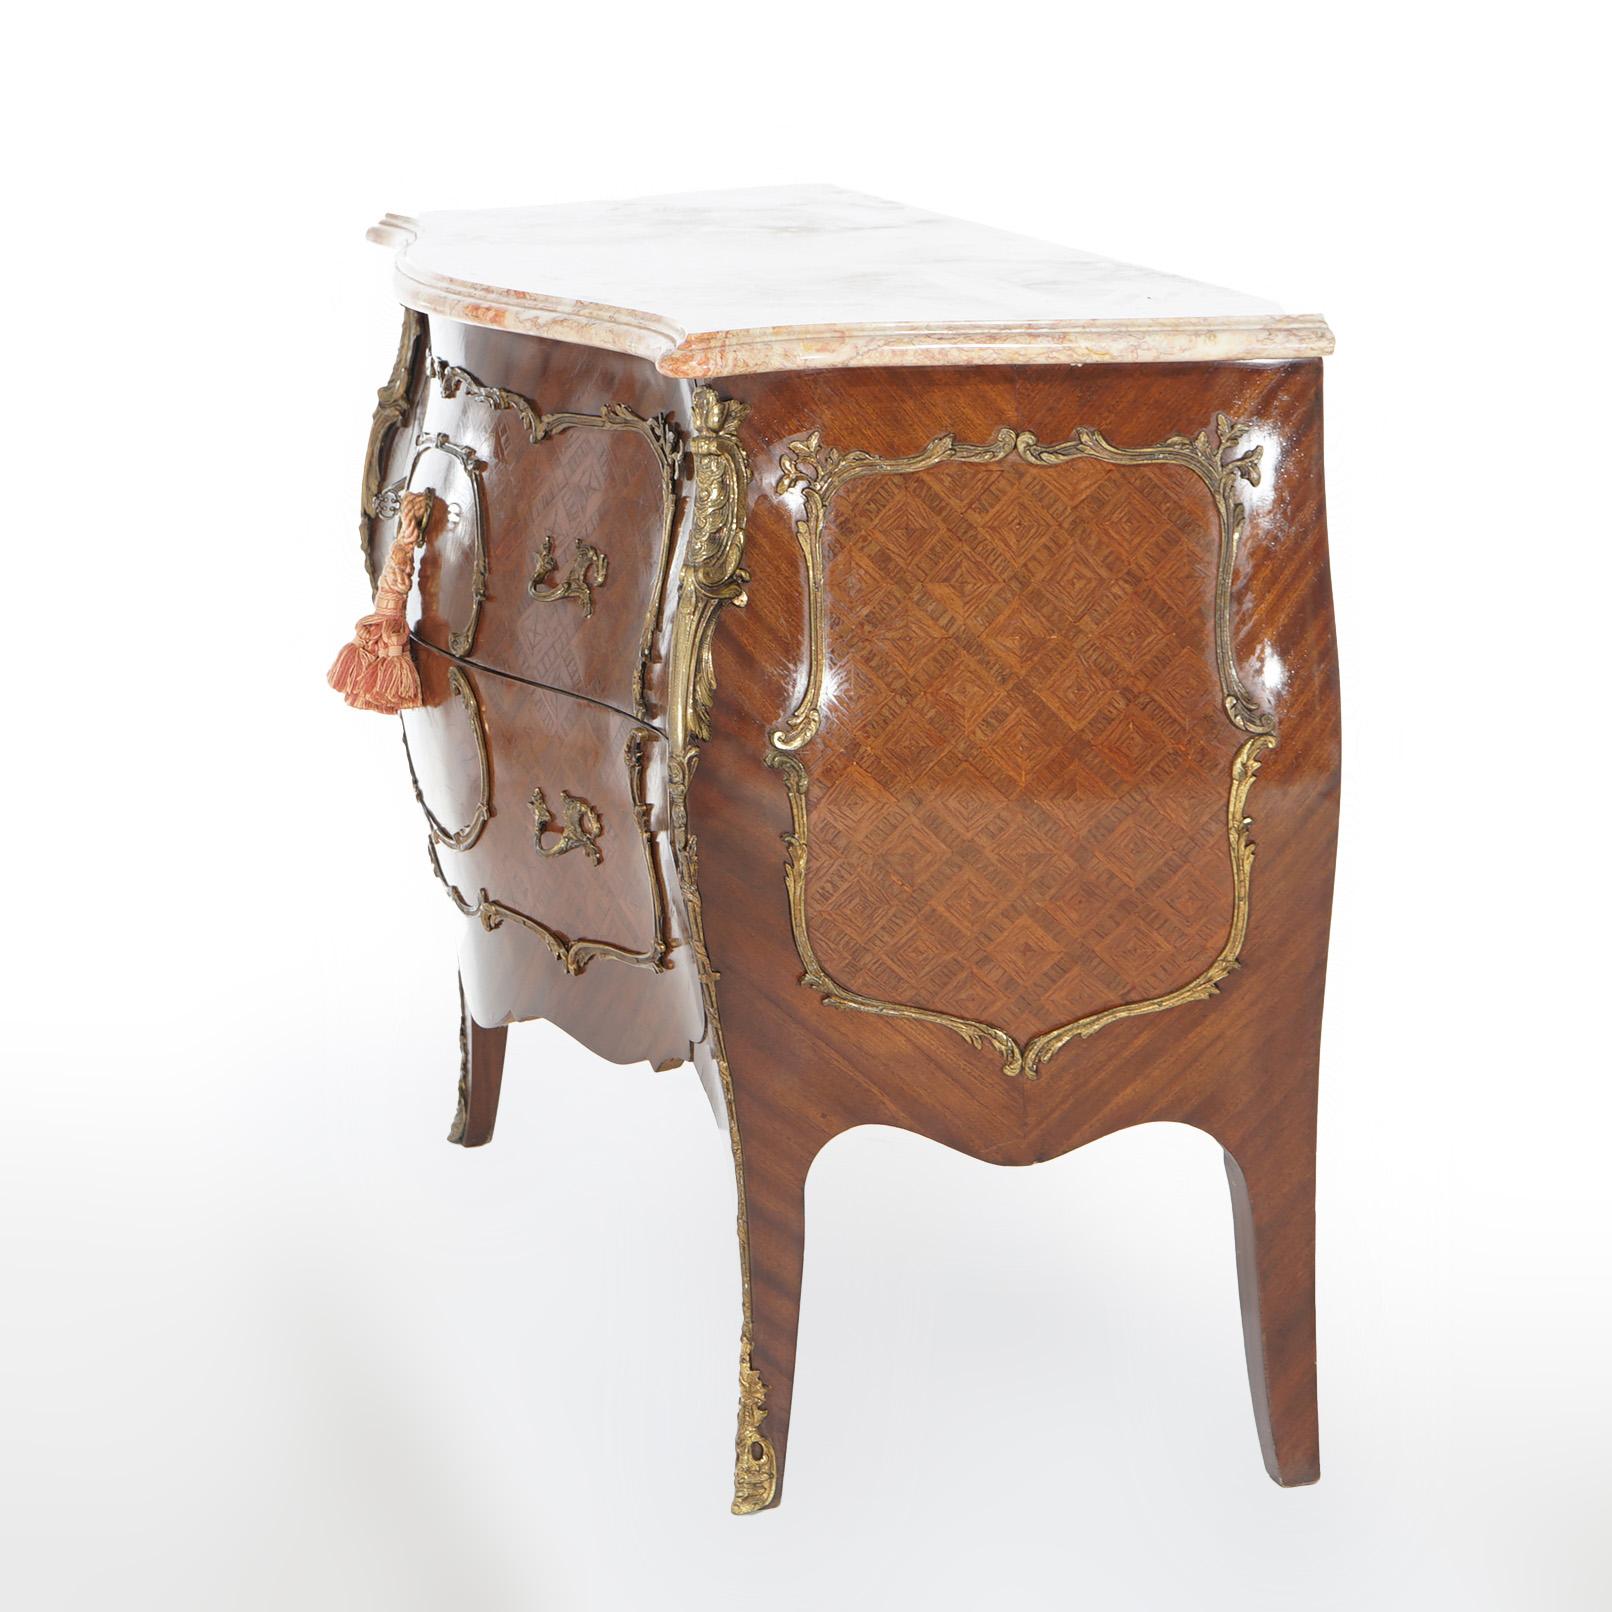 Ormolu Antique Louis XIV Style Kingwood & Satinwood Parquetry Marble Top Commode c1920 For Sale